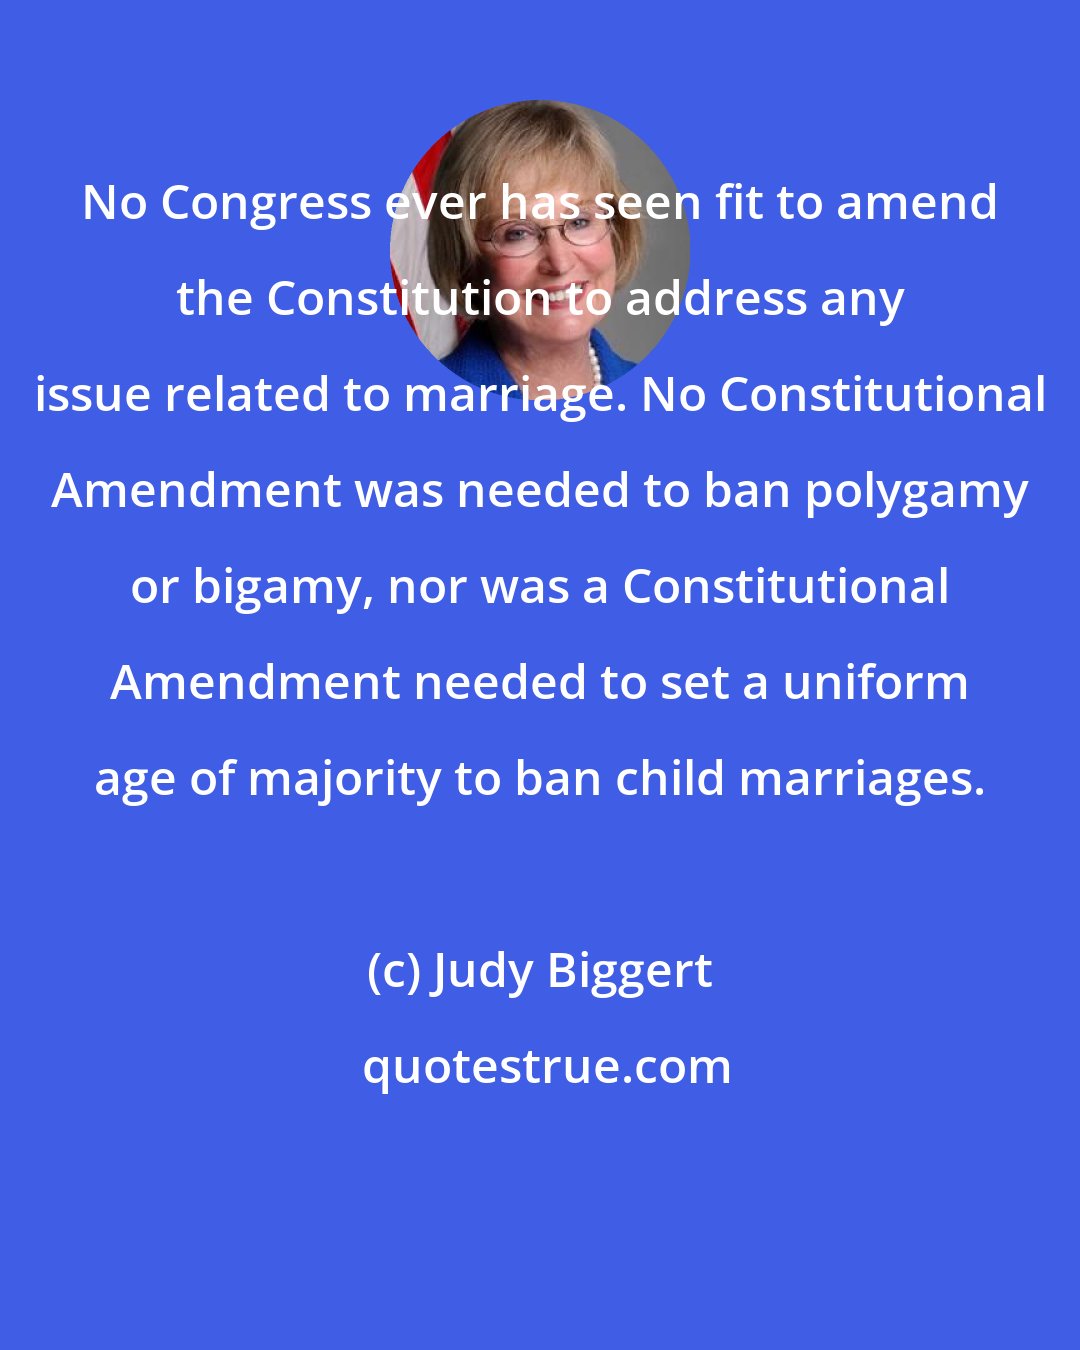 Judy Biggert: No Congress ever has seen fit to amend the Constitution to address any issue related to marriage. No Constitutional Amendment was needed to ban polygamy or bigamy, nor was a Constitutional Amendment needed to set a uniform age of majority to ban child marriages.